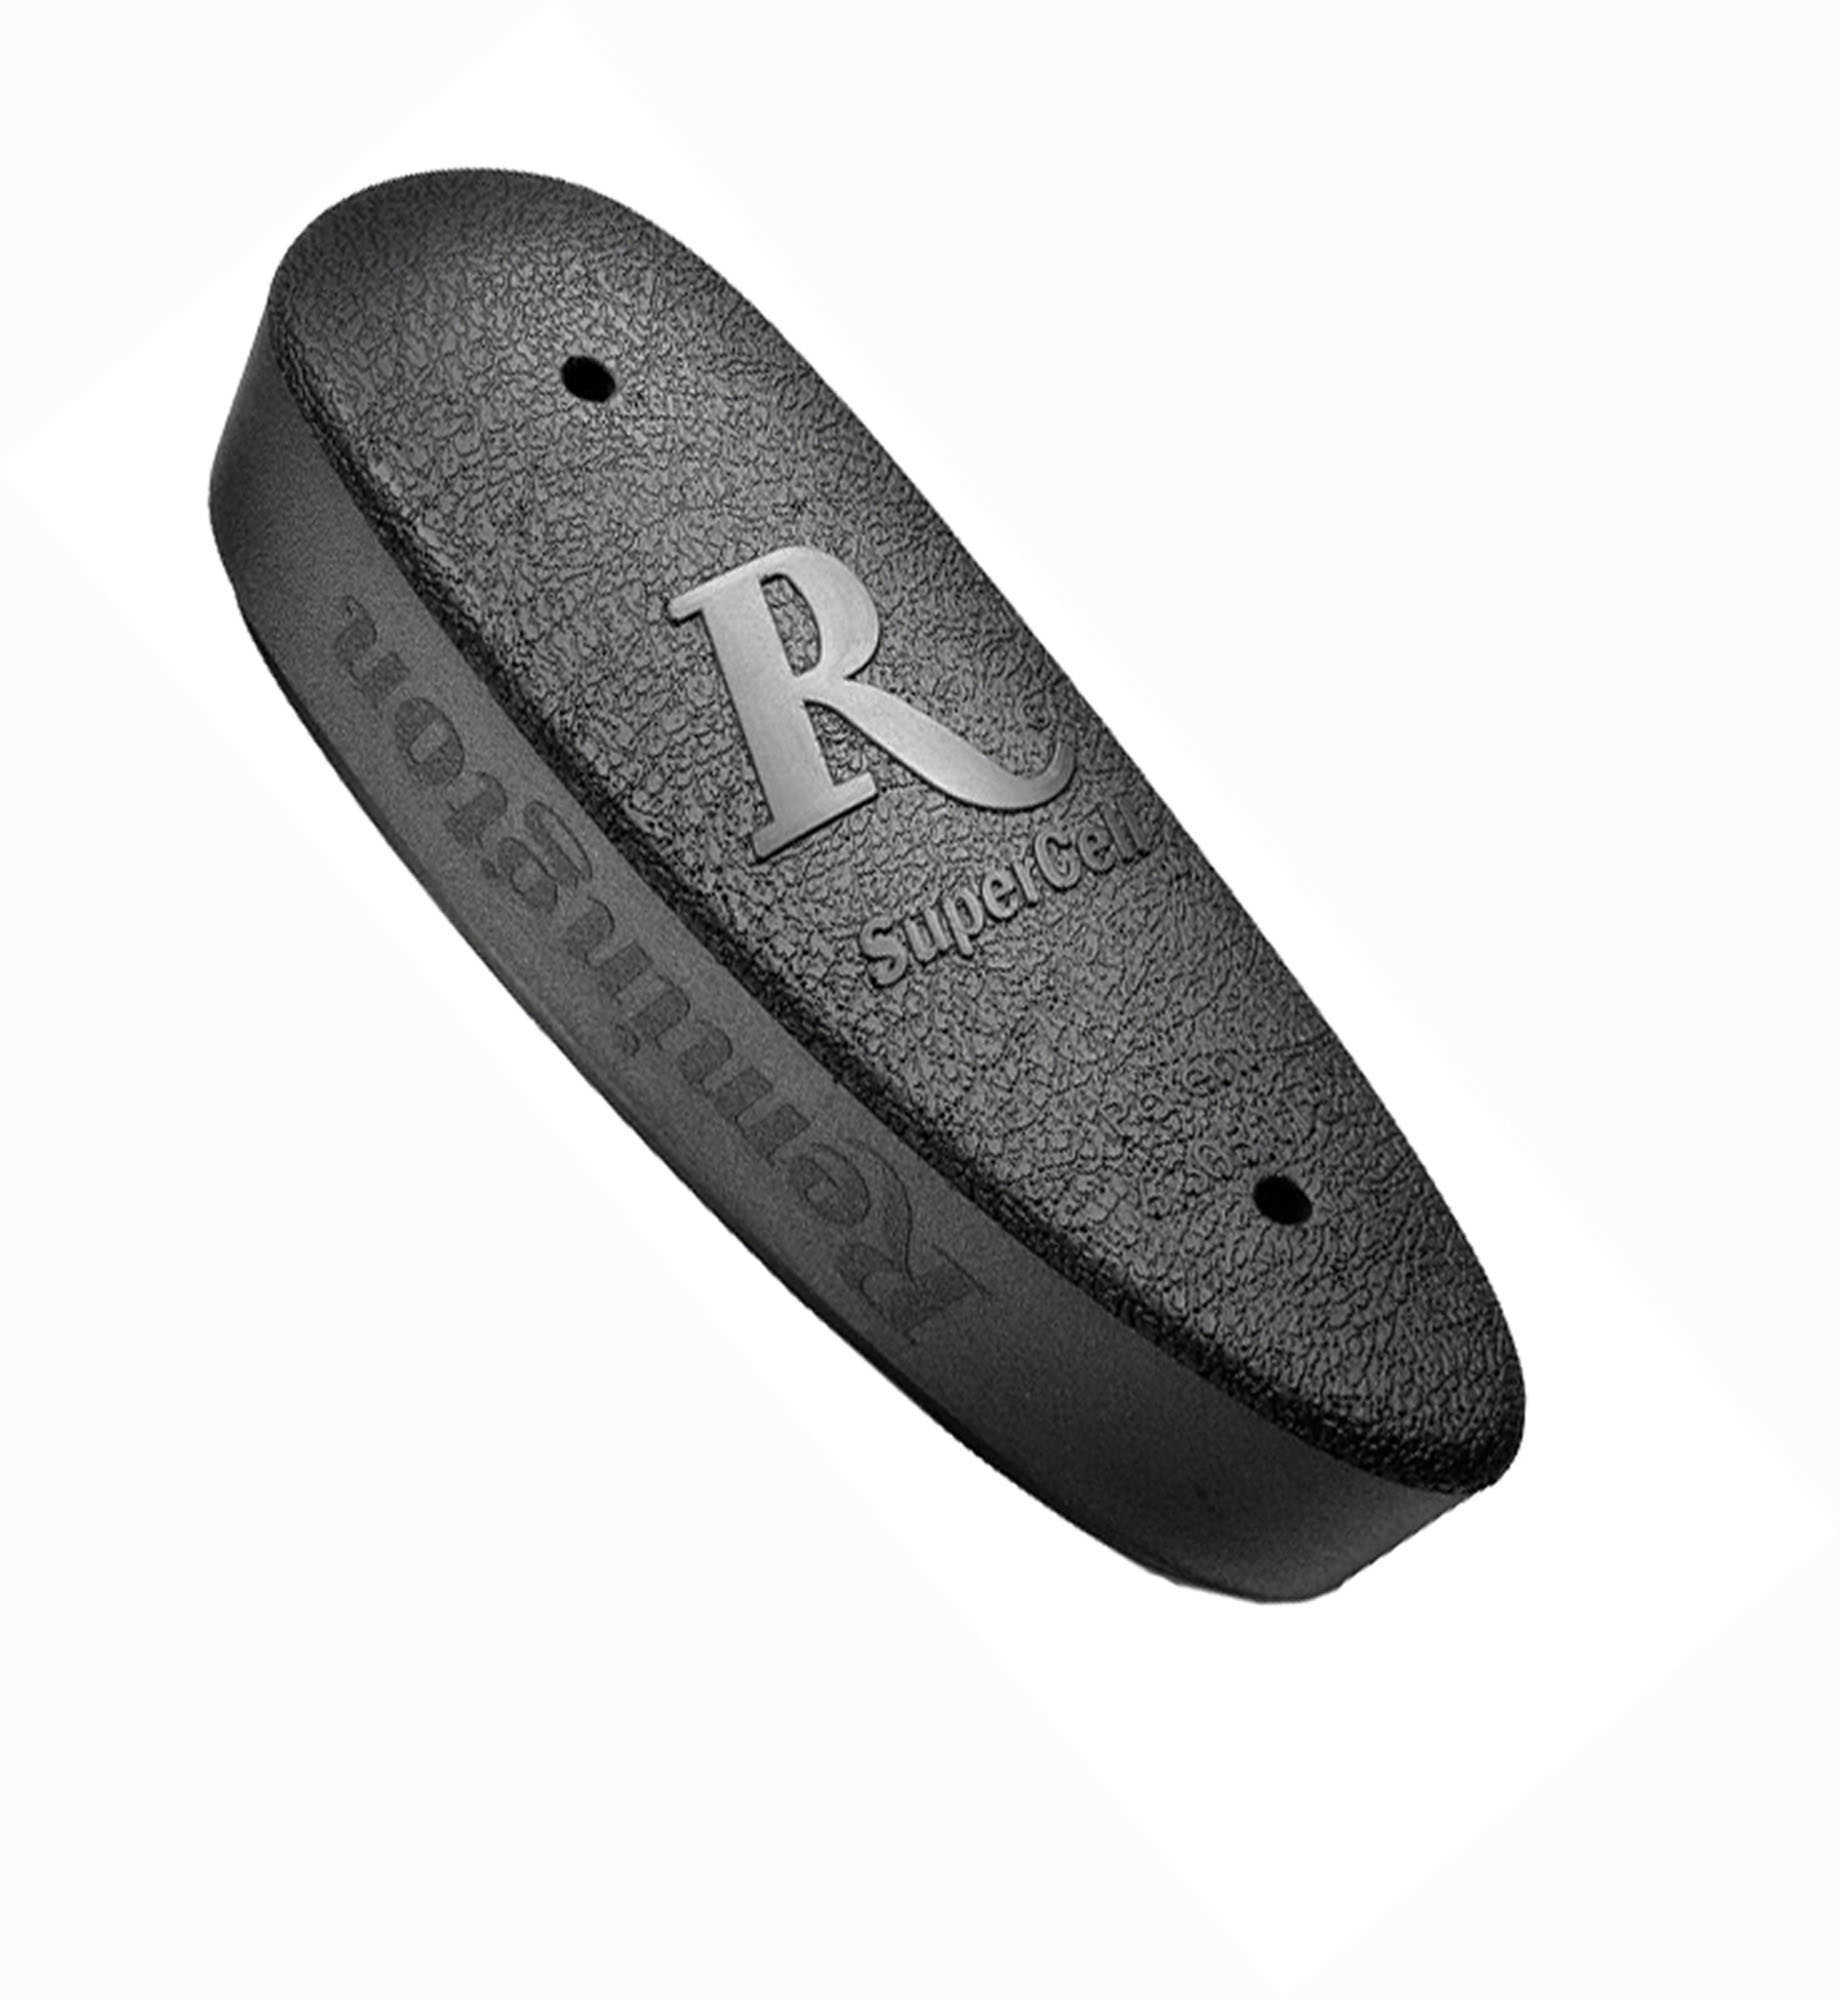 Remington Supercell Recoil Pad for Synthetic Stock Shotguns Model 19472